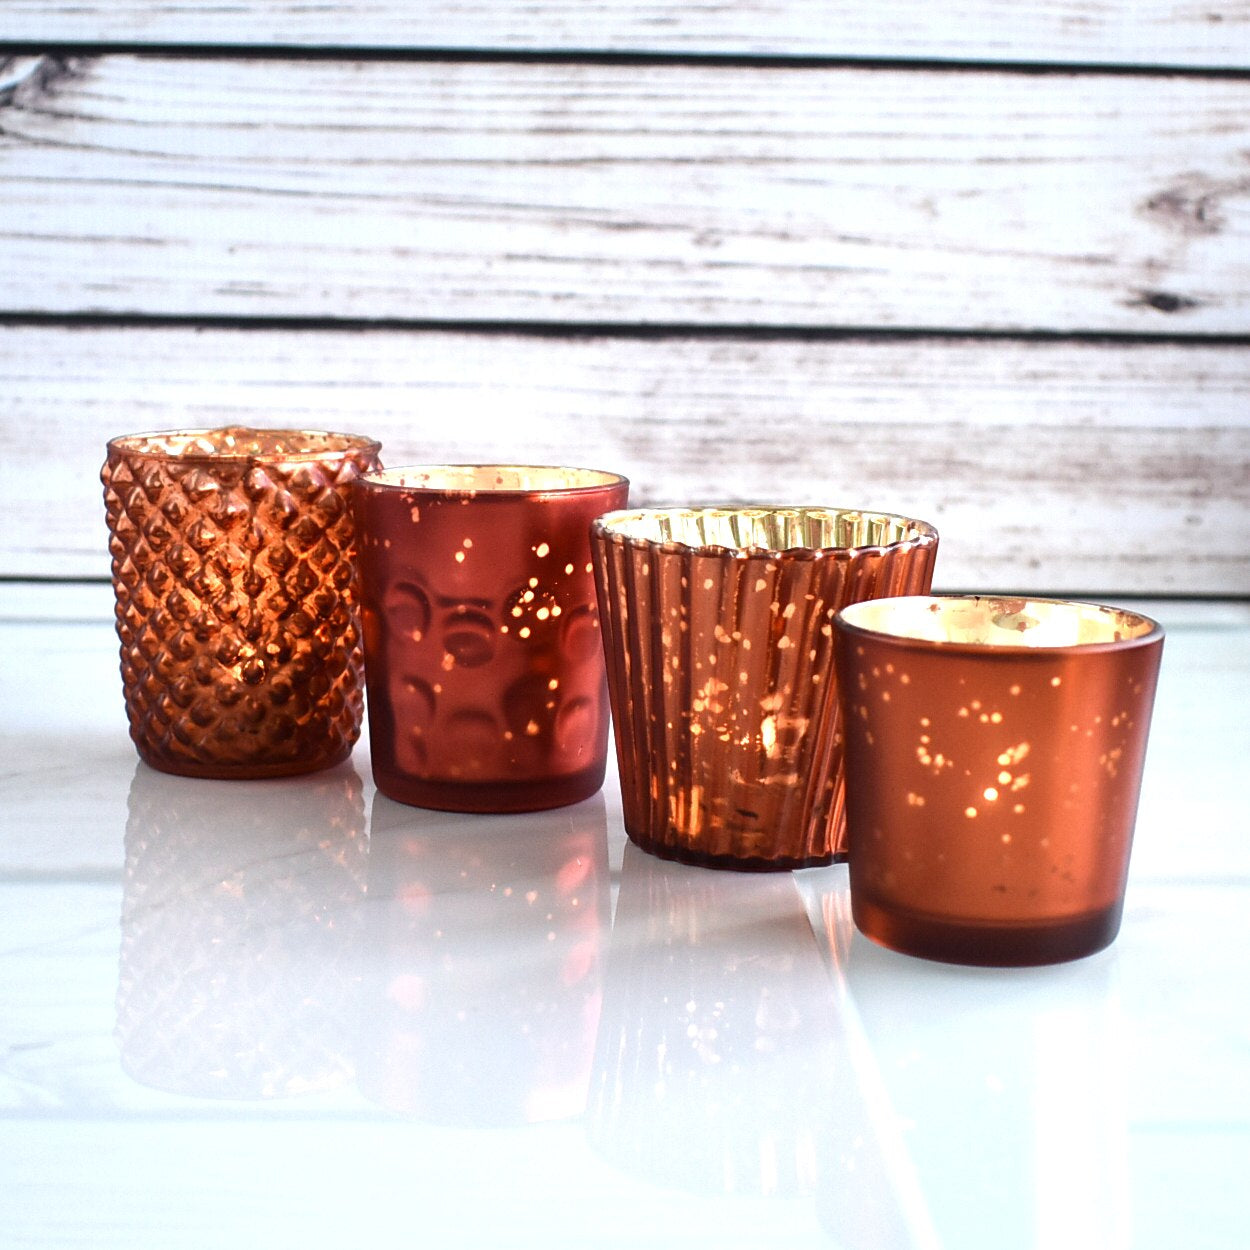 Best of Show Mercury Glass Tealight Votive Candle Holders (Rustic Copper Red, Set of 4, Assorted Styles) - for Weddings, Events, Parties, Home Decor - PaperLanternStore.com - Paper Lanterns, Decor, Party Lights & More